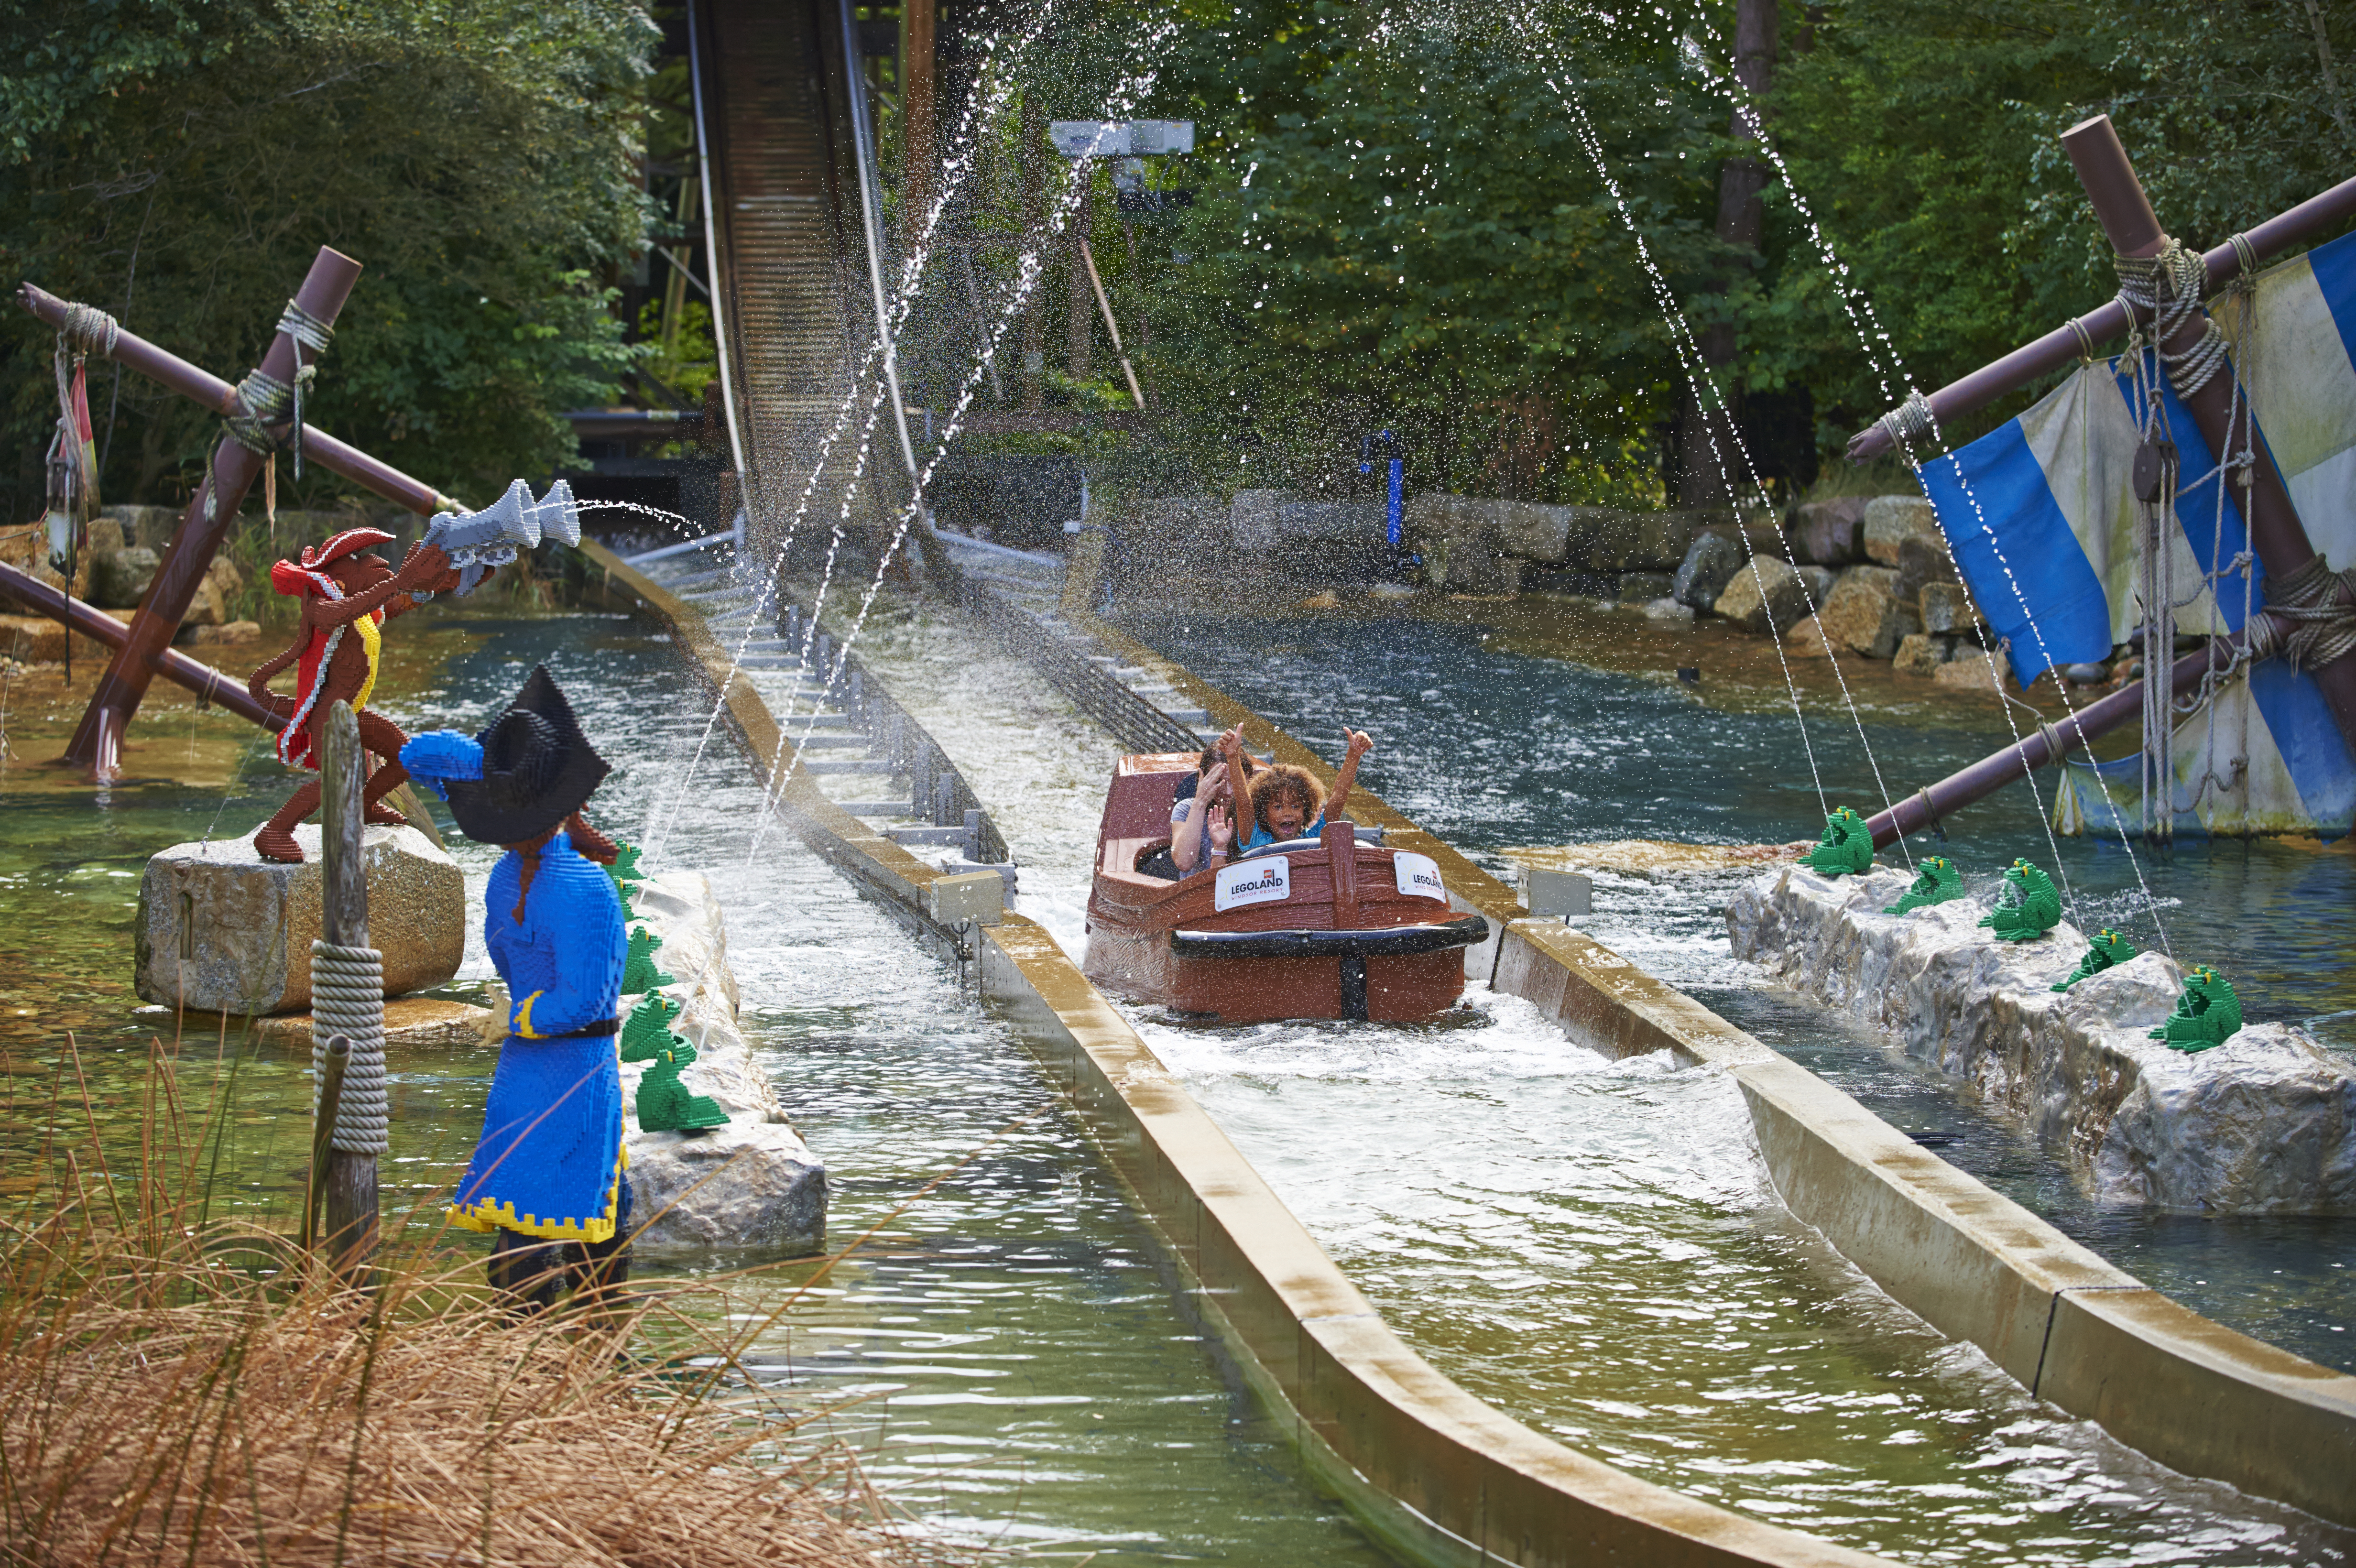 Family getting soaked on Pirate Falls log flume at the LEGOLAND® Windsor Resort